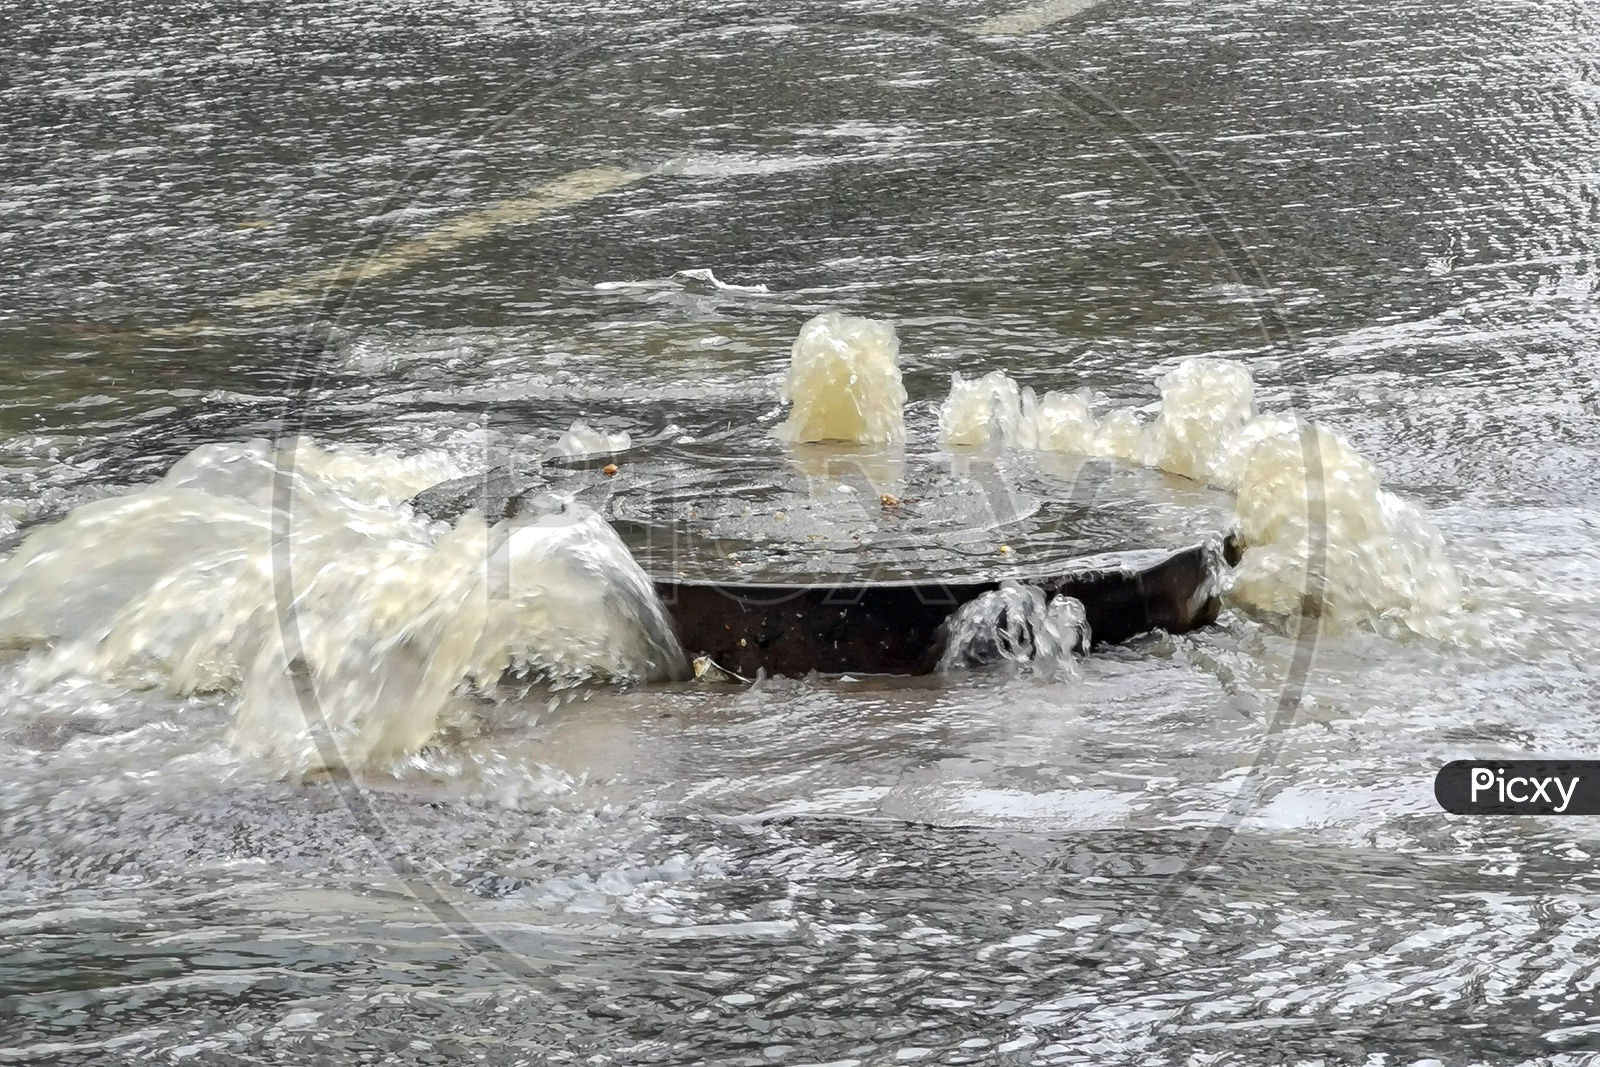 GHMC HMWS  Manhole  Overflow With Drainage Or Sewage Water Due to Heavy Rains Closeup